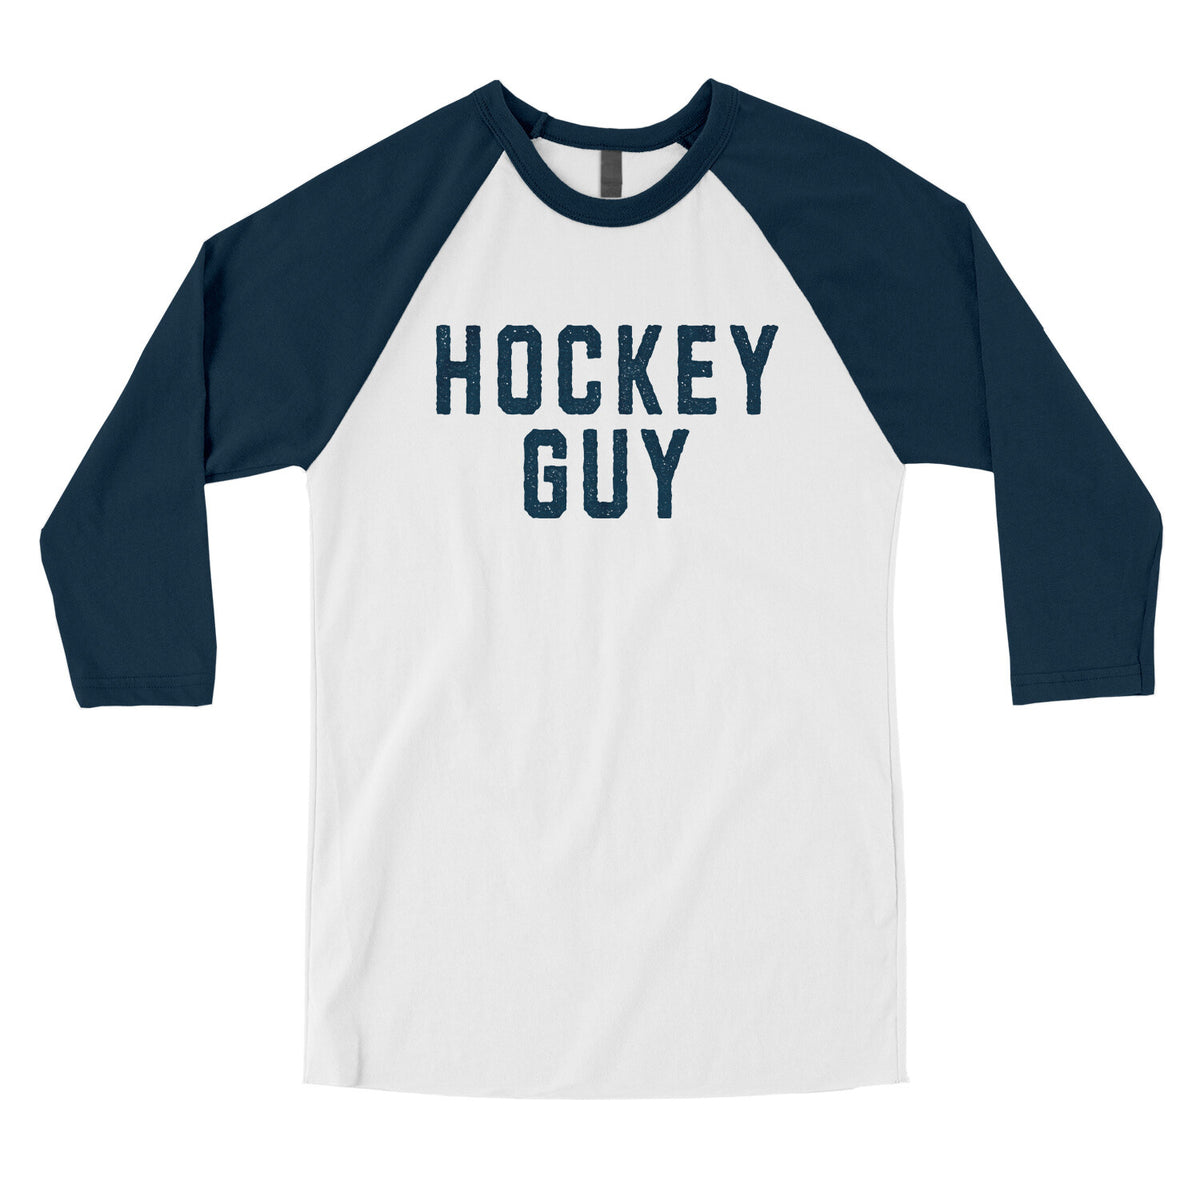 Hockey Guy in White with Navy Color